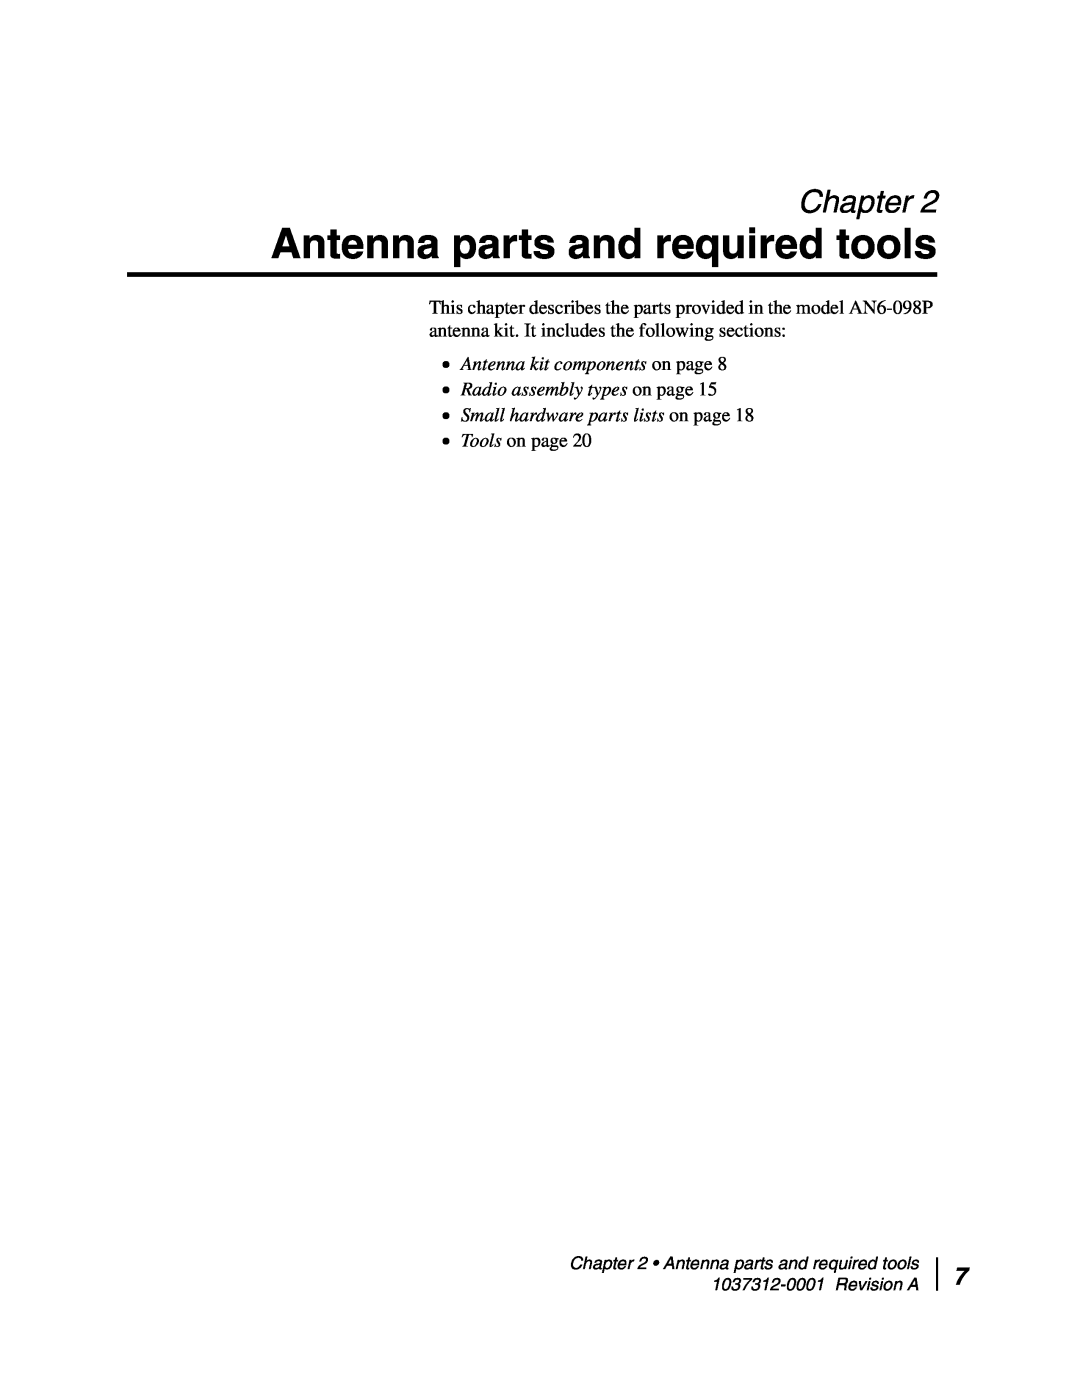 Hughes AN6-098P installation manual Antenna parts and required tools, Chapter, Tools on page 